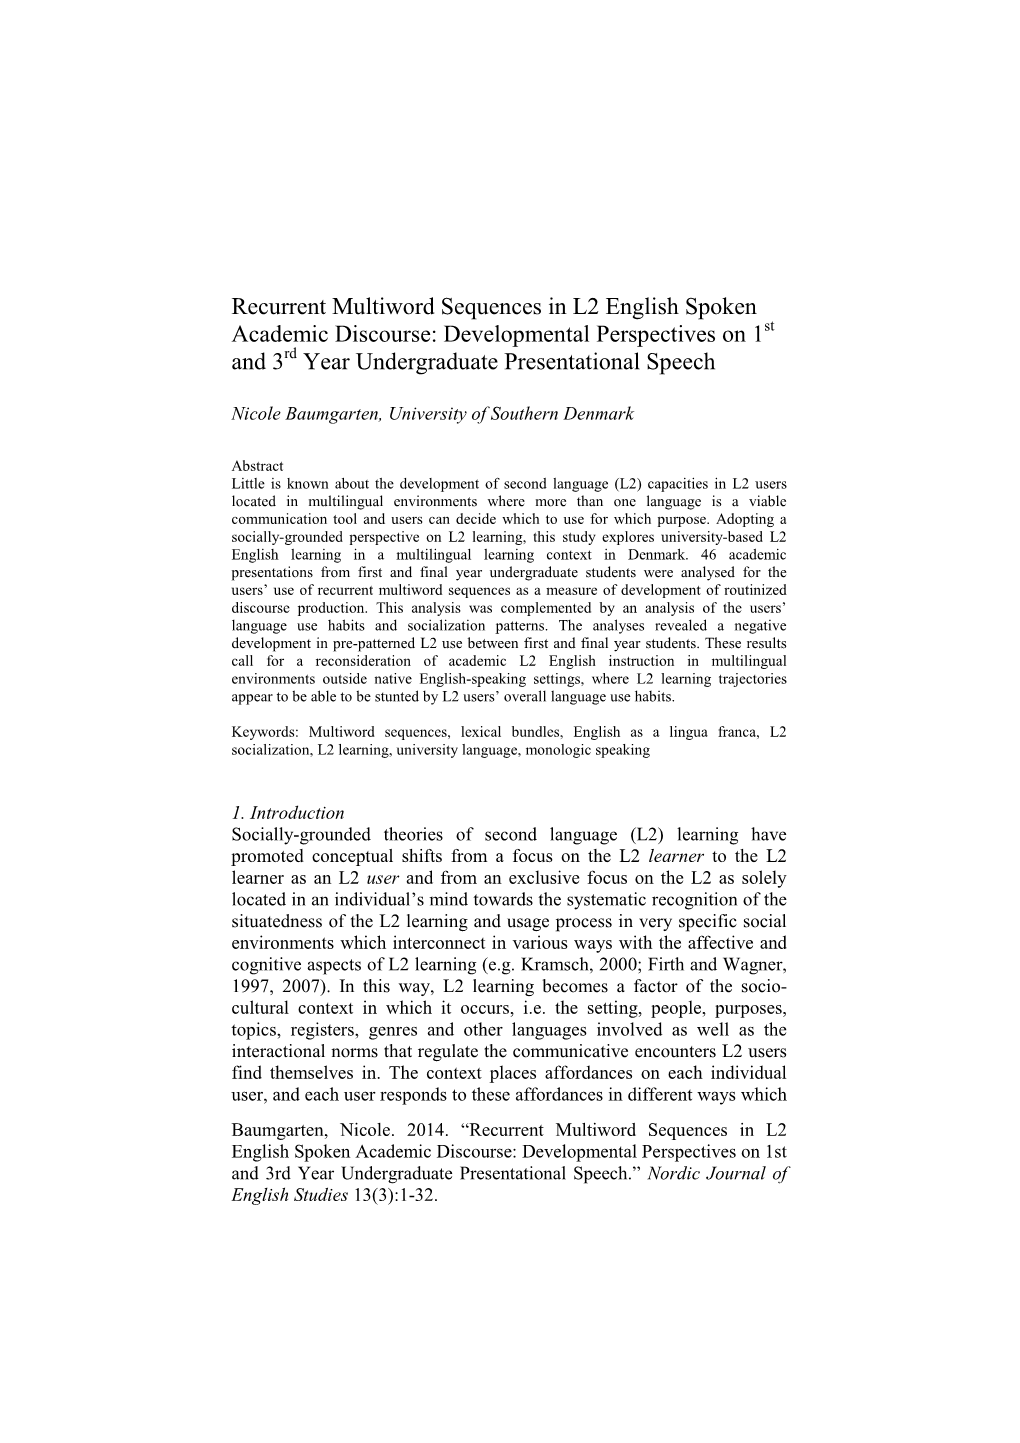 Recurrent Multiword Sequences in L2 English Spoken Academic Discourse: Developmental Perspectives on 1St and 3 Rd Year Undergraduate Presentational Speech